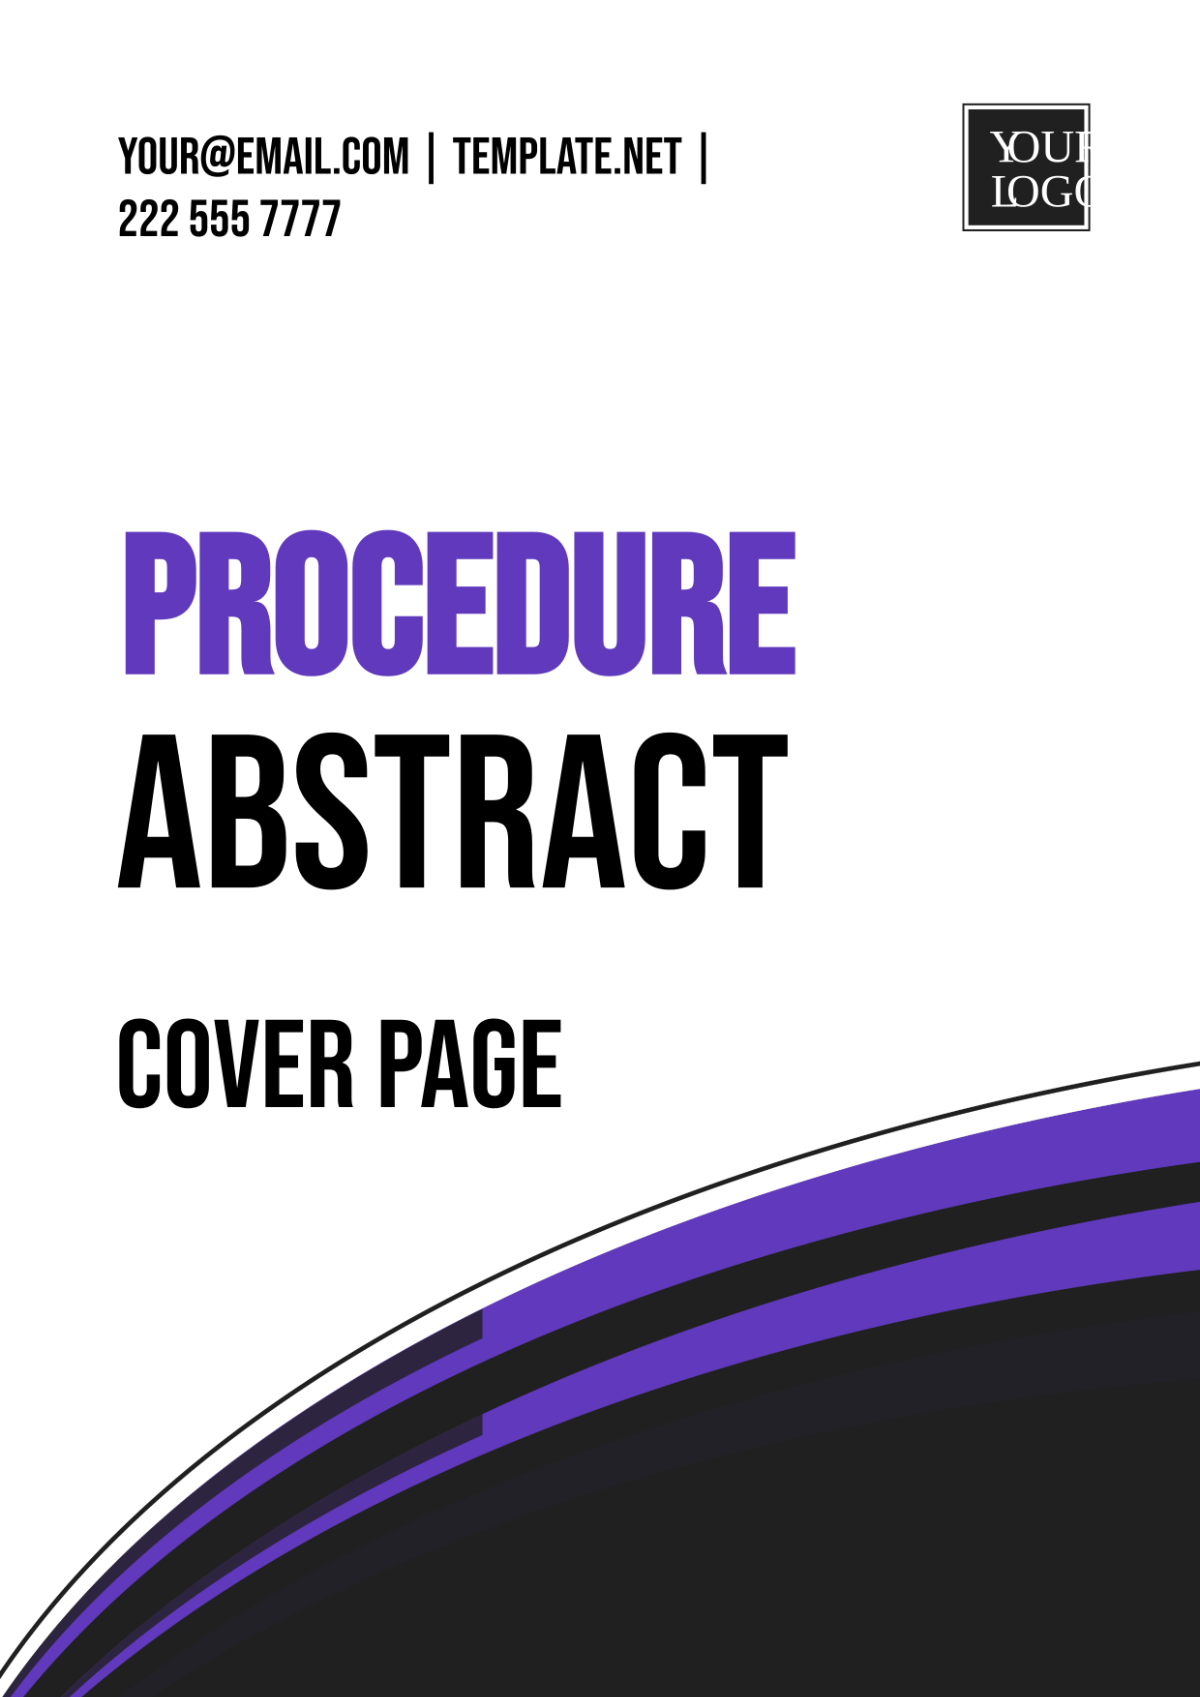 Procedure Abstract Cover Page Template